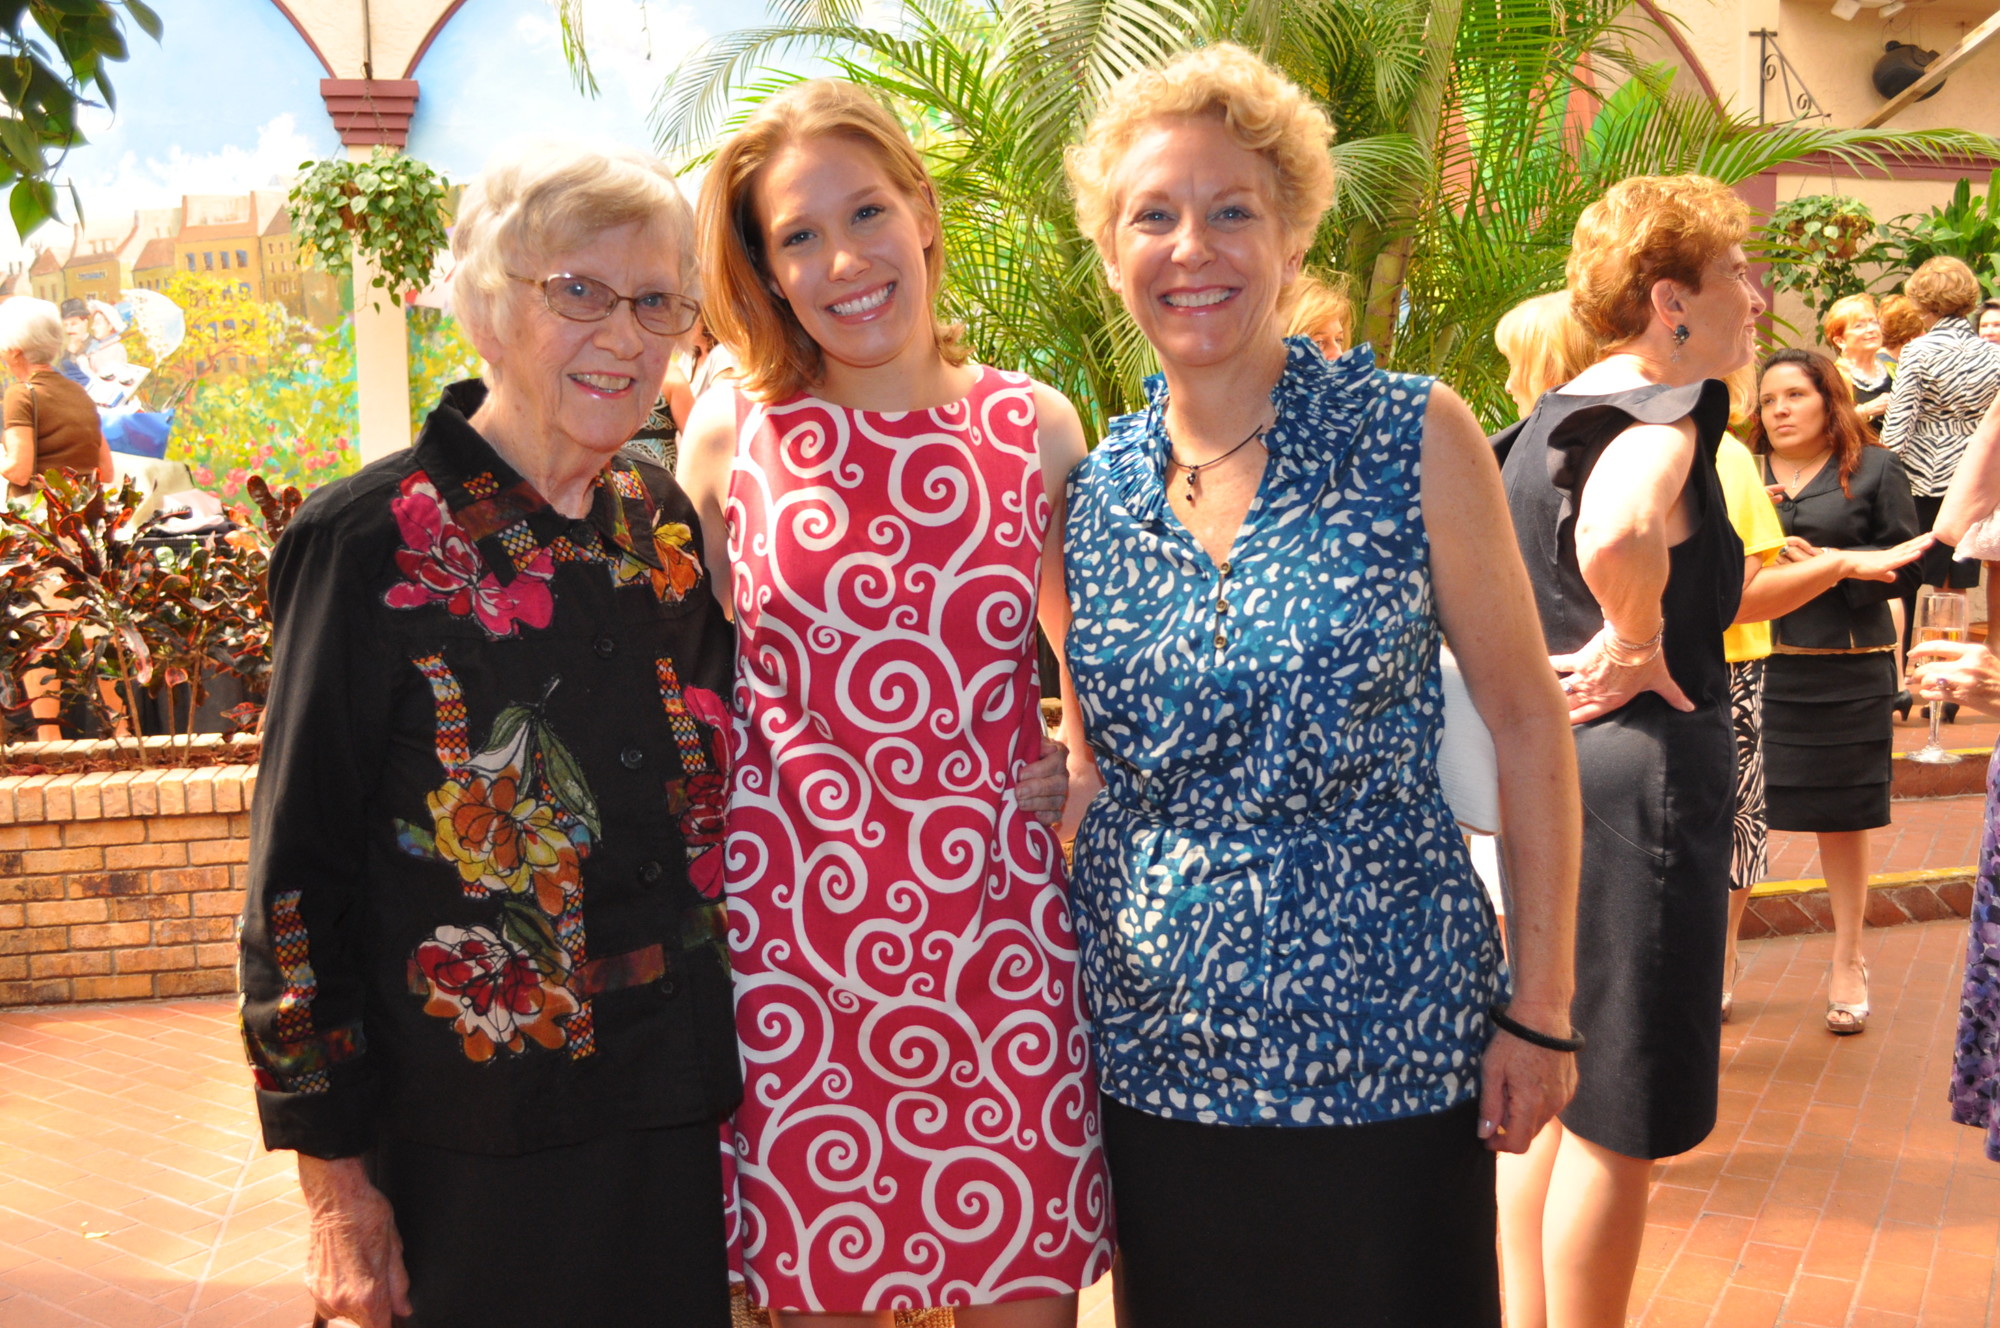 Suzanne Bissell, pictured in 2012 with her granddaughter, Grier Ferguson, and her daughter, Cady Ferguson, moved to Sarasota in 1952 with her husband, Jack Bissell, after earning an education degree from the University of Florida. File photo